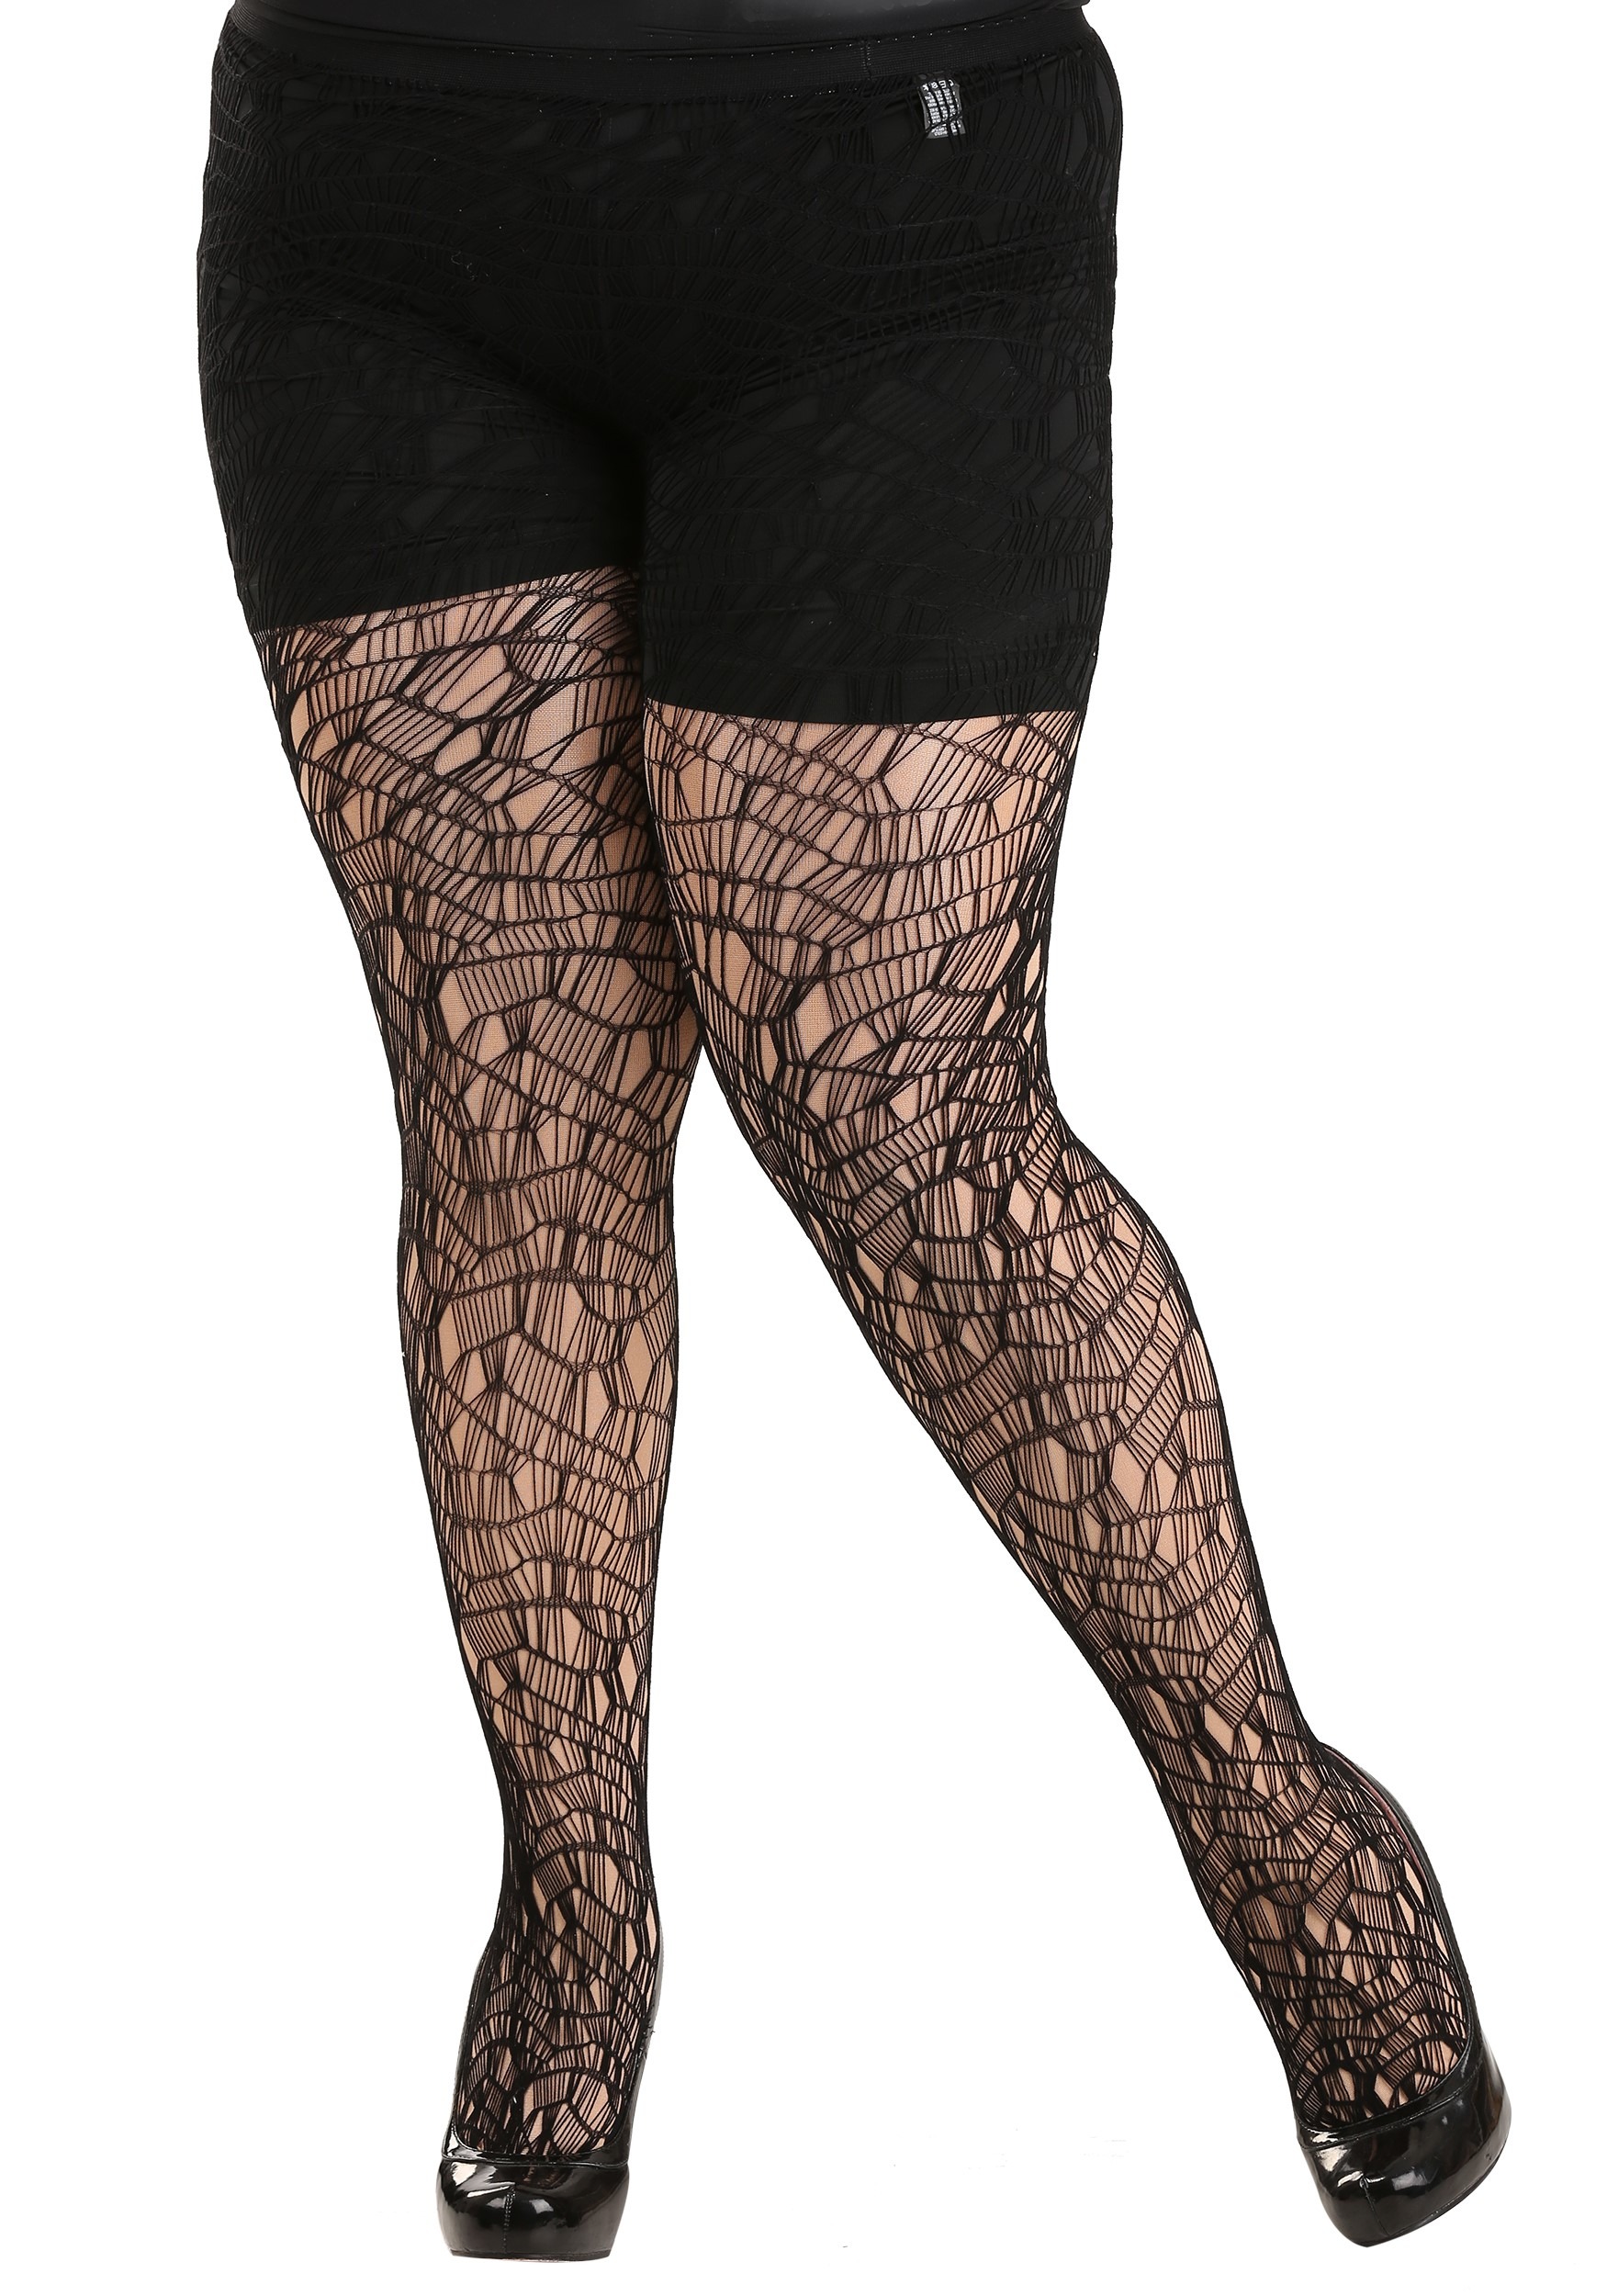 Edgy and Chic Shredded Tights